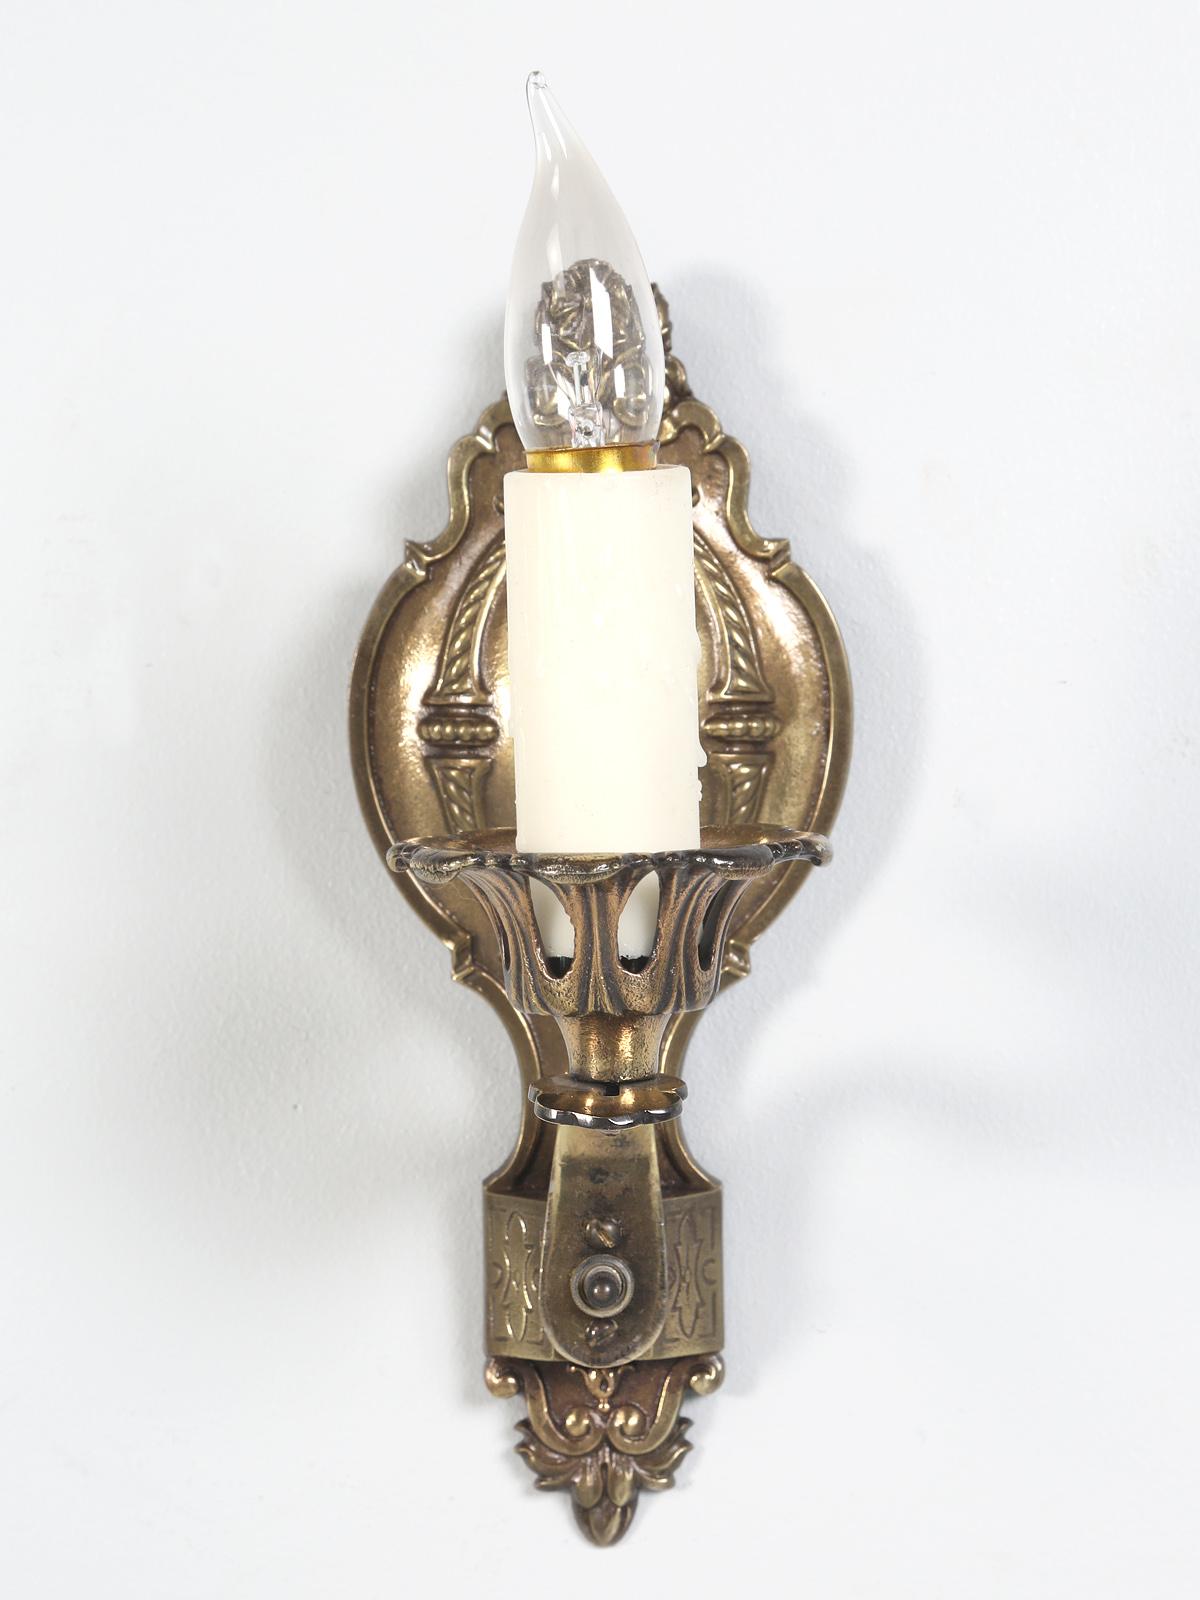 Single American brass sconce, that we removed from a local North Shore home, in working condition. The heavy weight would indicate a high quality when originally produced.